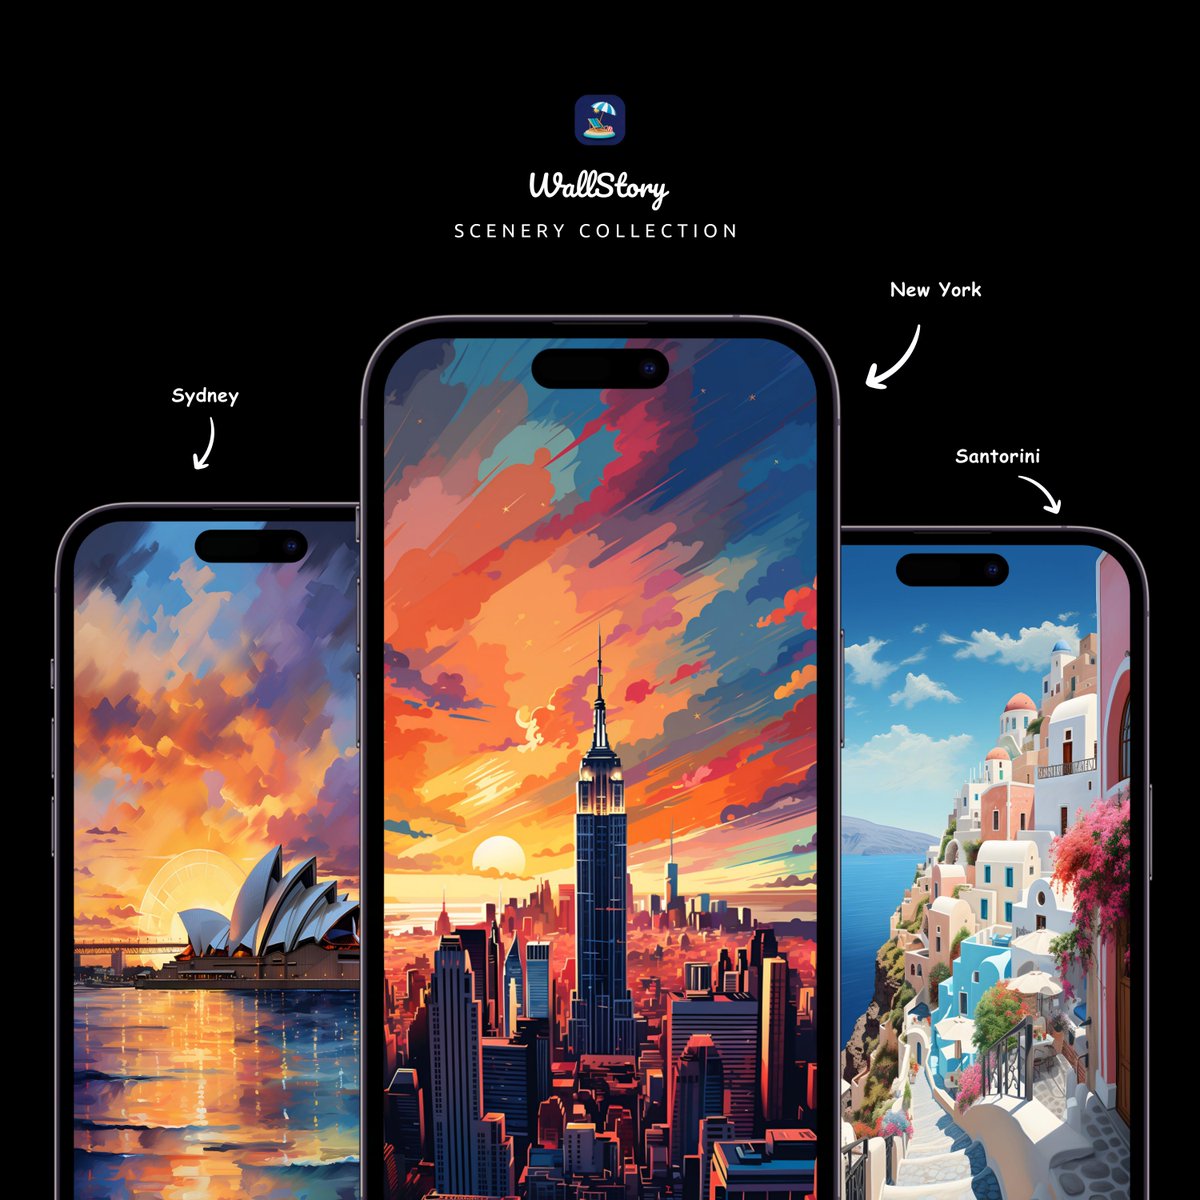 'Just added 5 stunning City Wallpapers to Wallstory! 🌆✨ 

Check them out and transform your screen with these breathtaking urban views. 📱🏙️ 

Download 👇

Android - bit.ly/Wallstory
iOS - bit.ly/WallStory_Kofi

#Wallstory #CityWallpapers #UrbanVibes